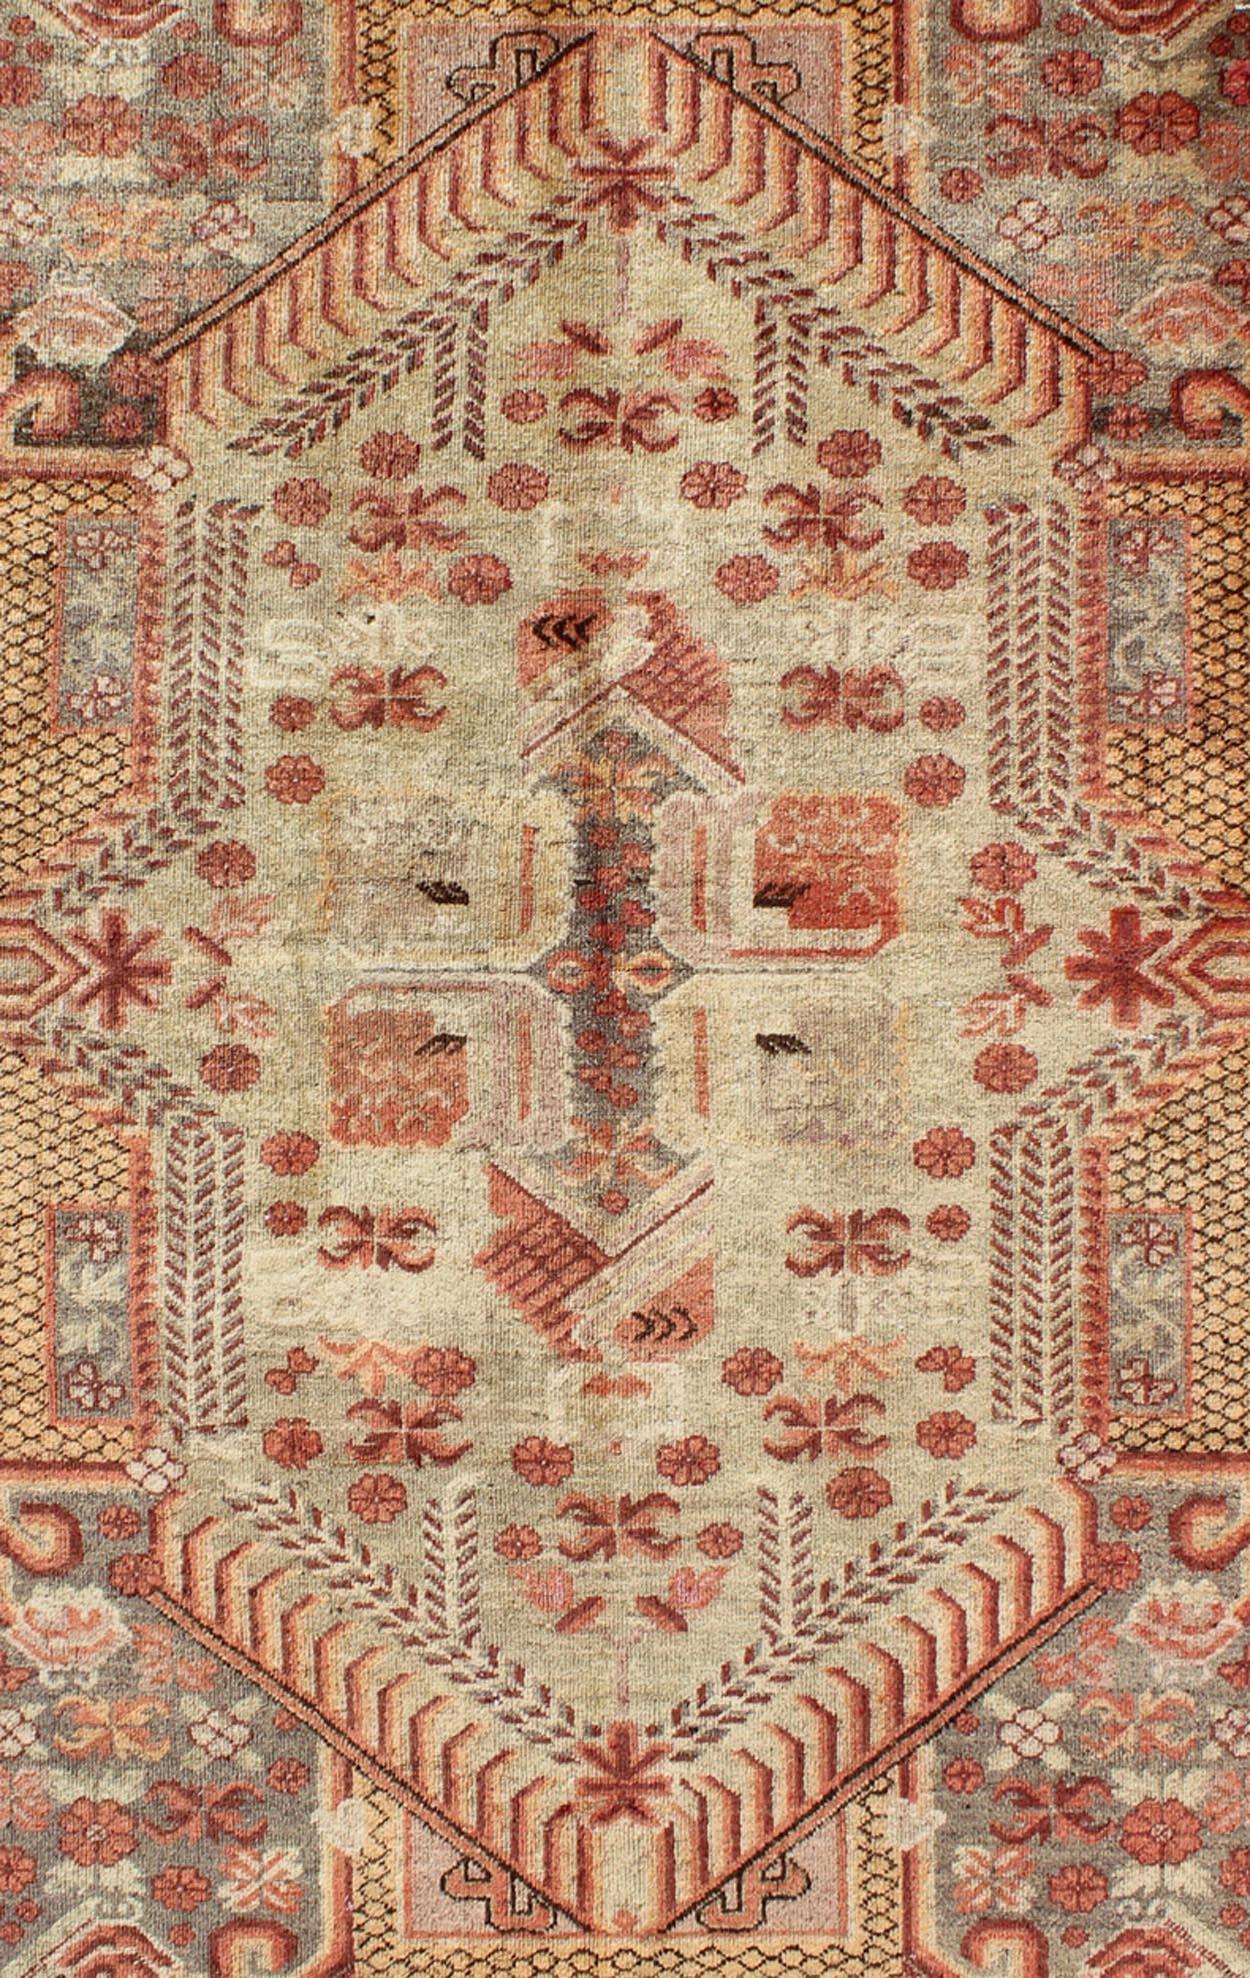 Turkestan Antique Khotan Rug with Unique Pattern in Gray Border, Soft Yellow Green Field For Sale